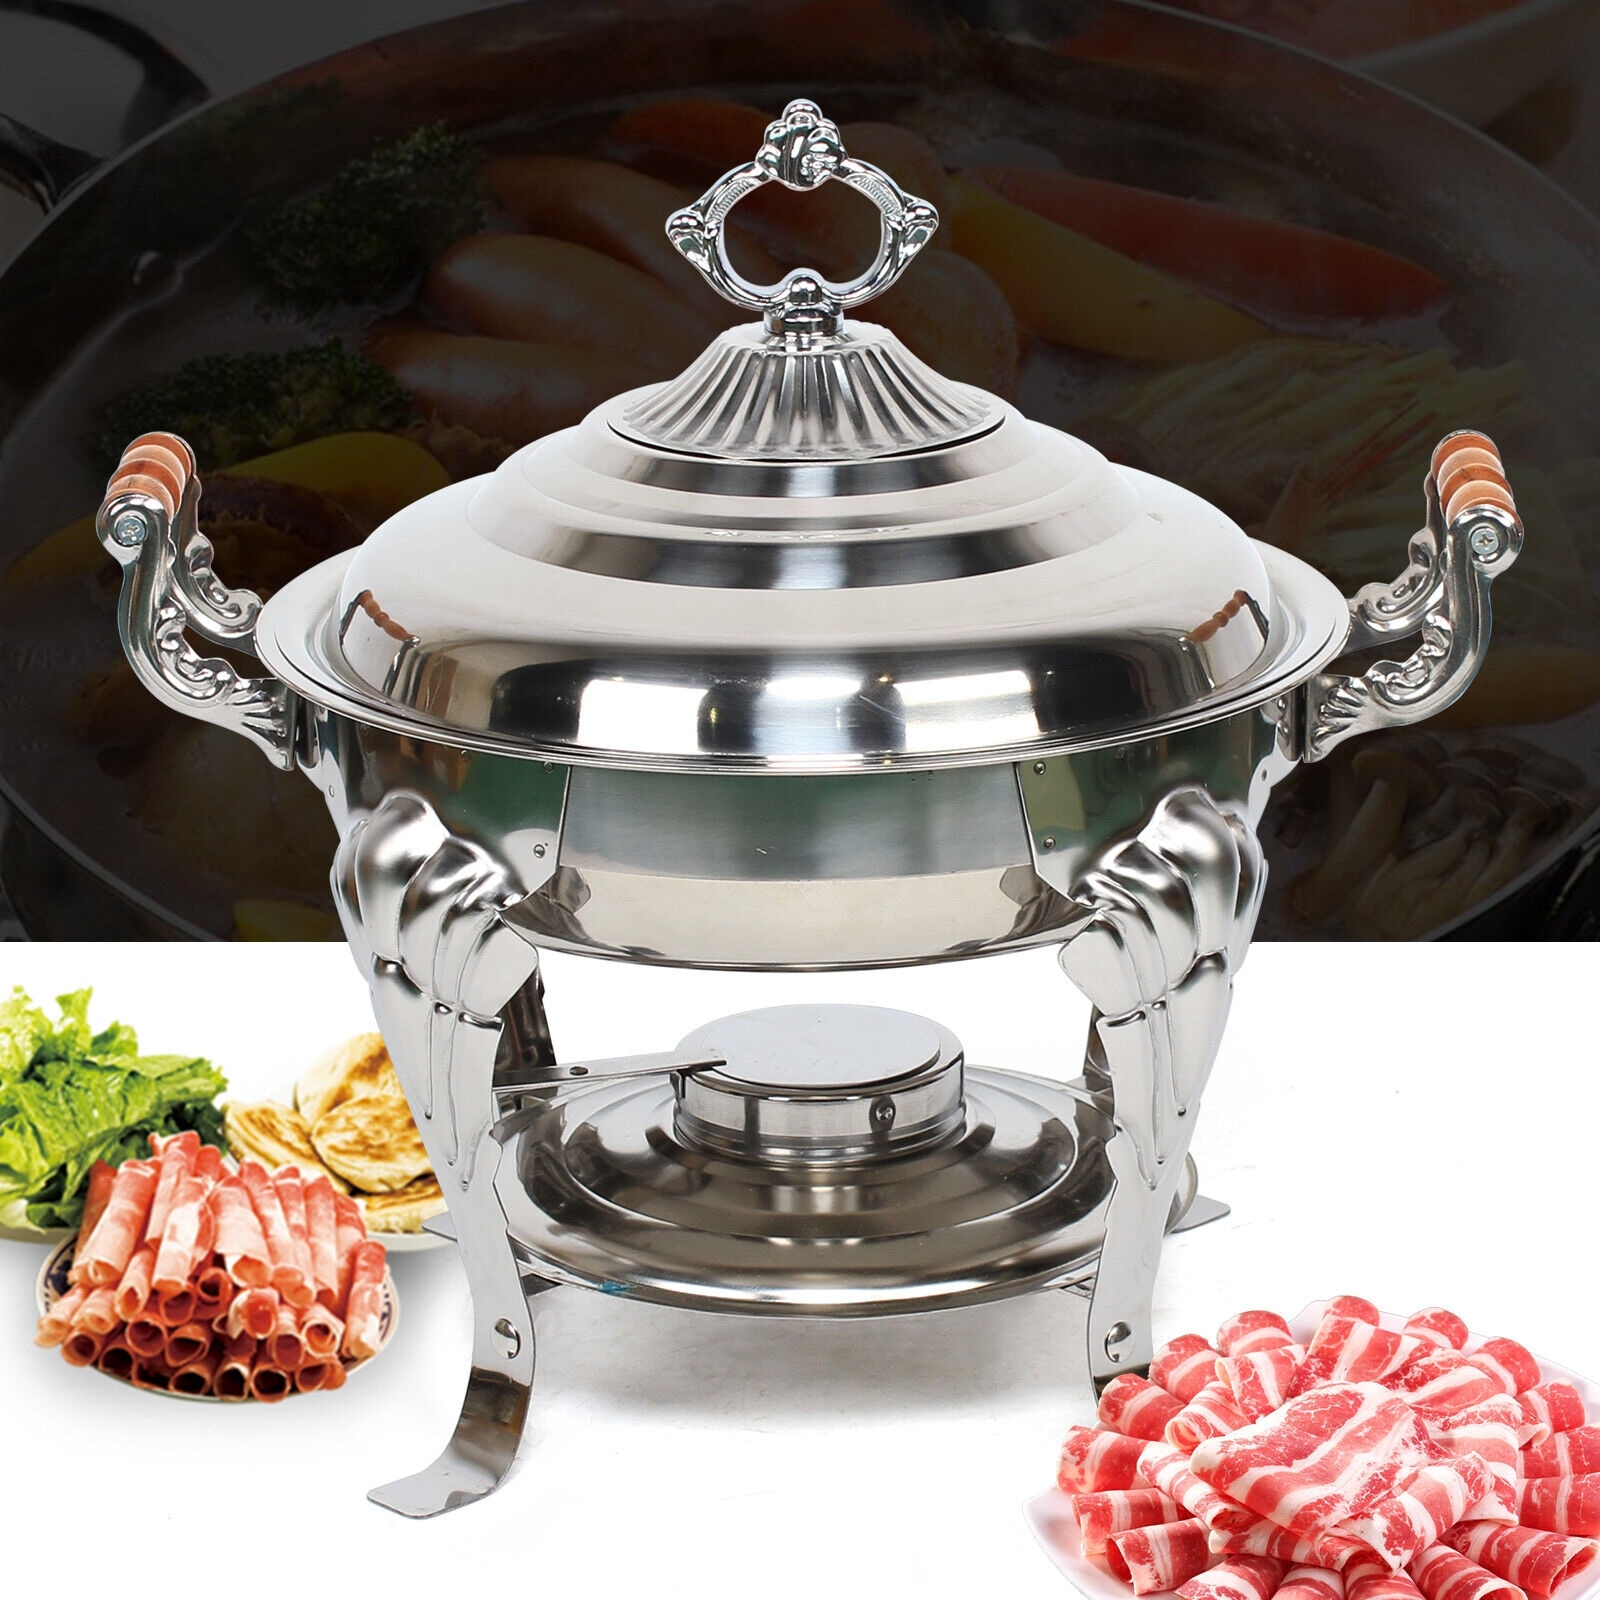 https://ak1.ostkcdn.com/images/products/is/images/direct/01c162712c9b0bc9a7ca31b8b5953e8e64747342/Stainless-Steel-Round-Chafing-Dish-4-Quart-Serving-Buffet-Warmer.jpg